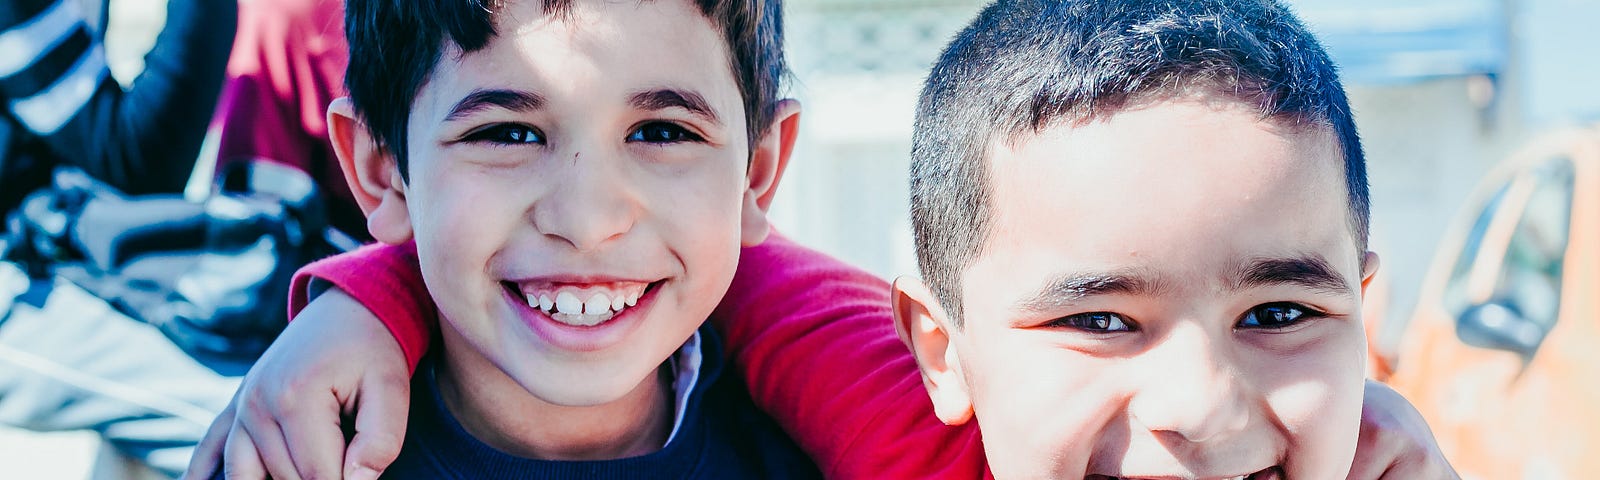 Two young boys smiling at the camera with arms around each other’s shoulders